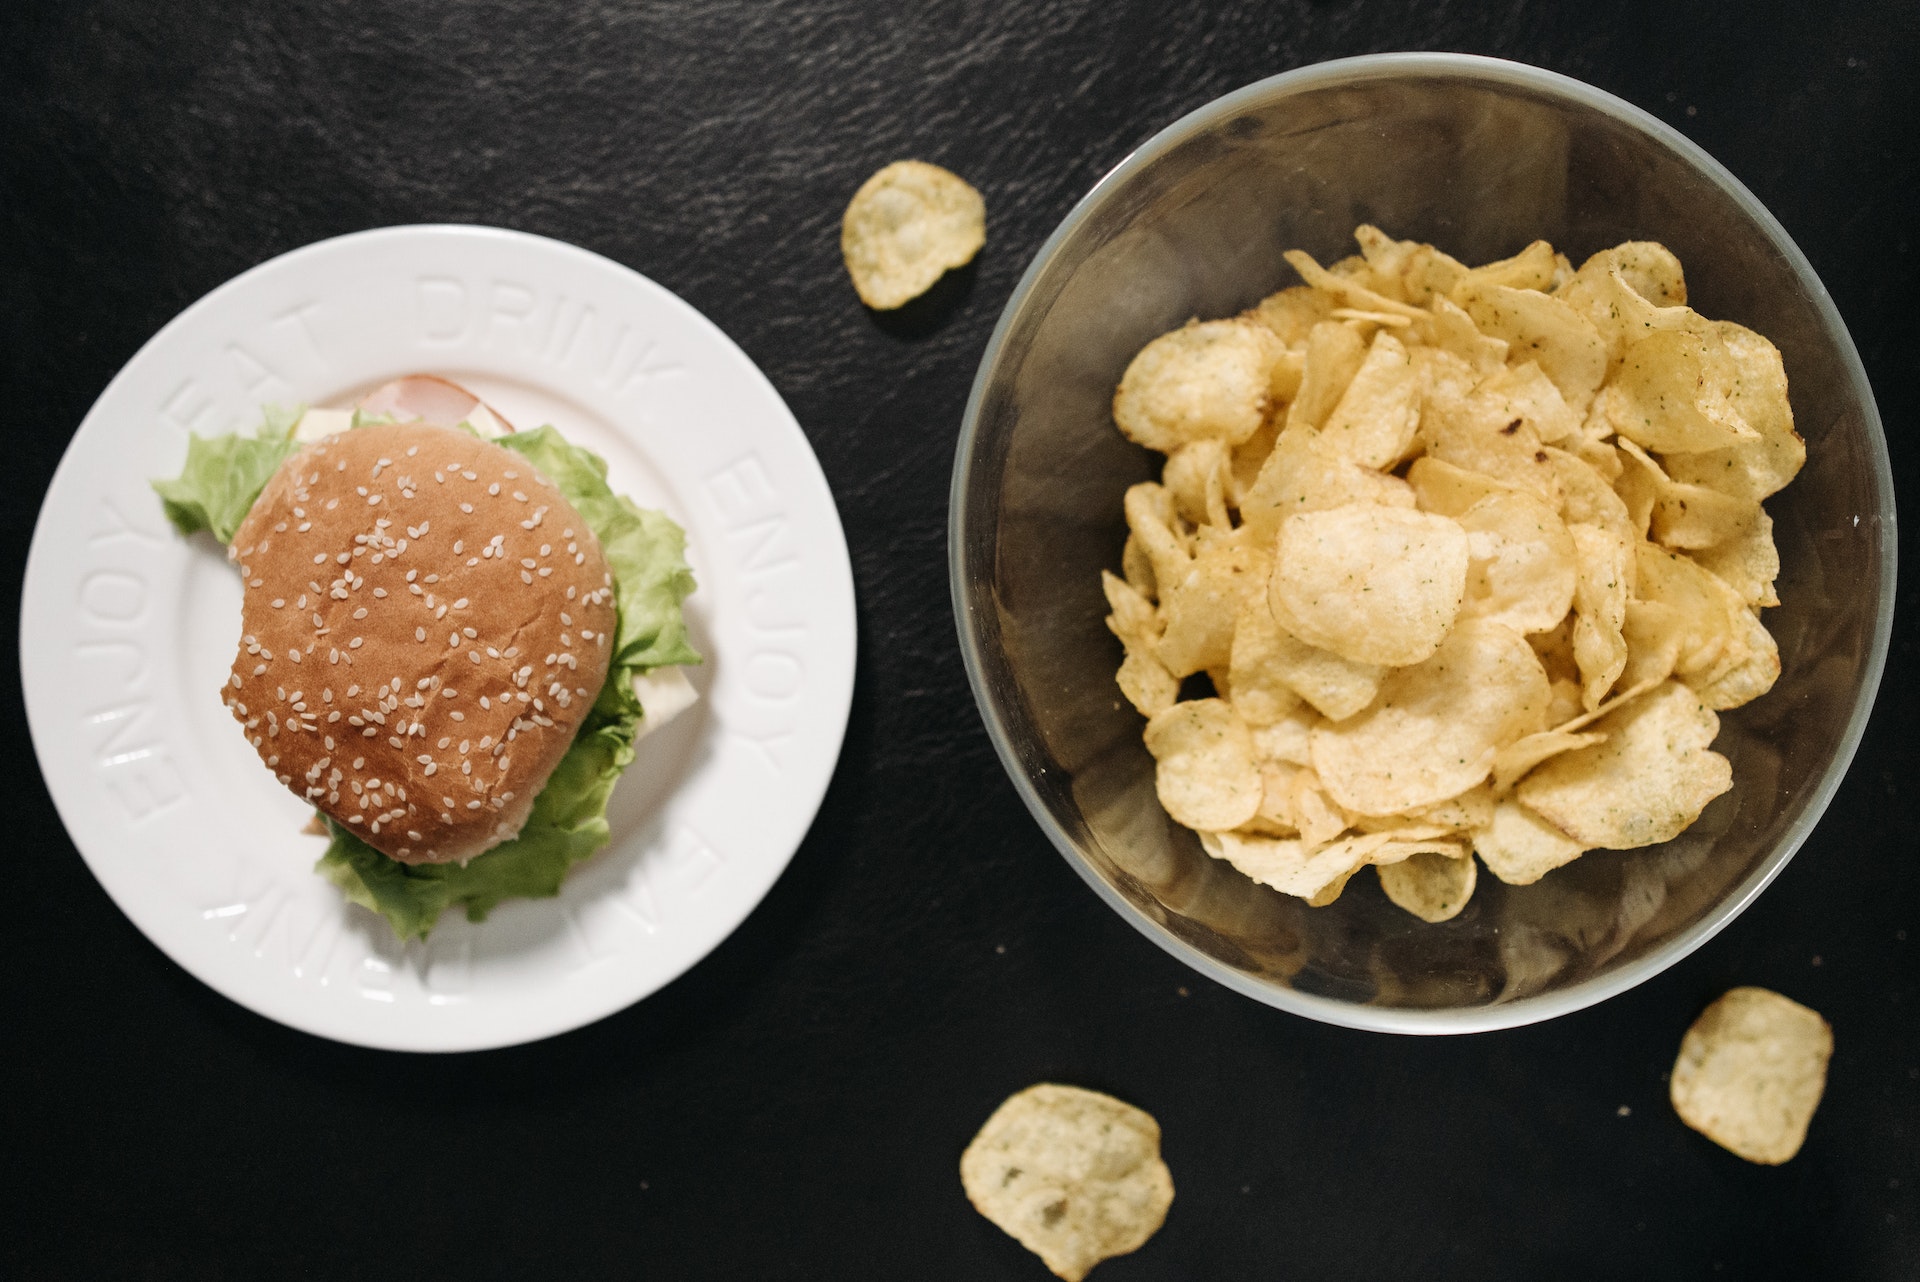 Add potato chips to burgers for a welcome crunch